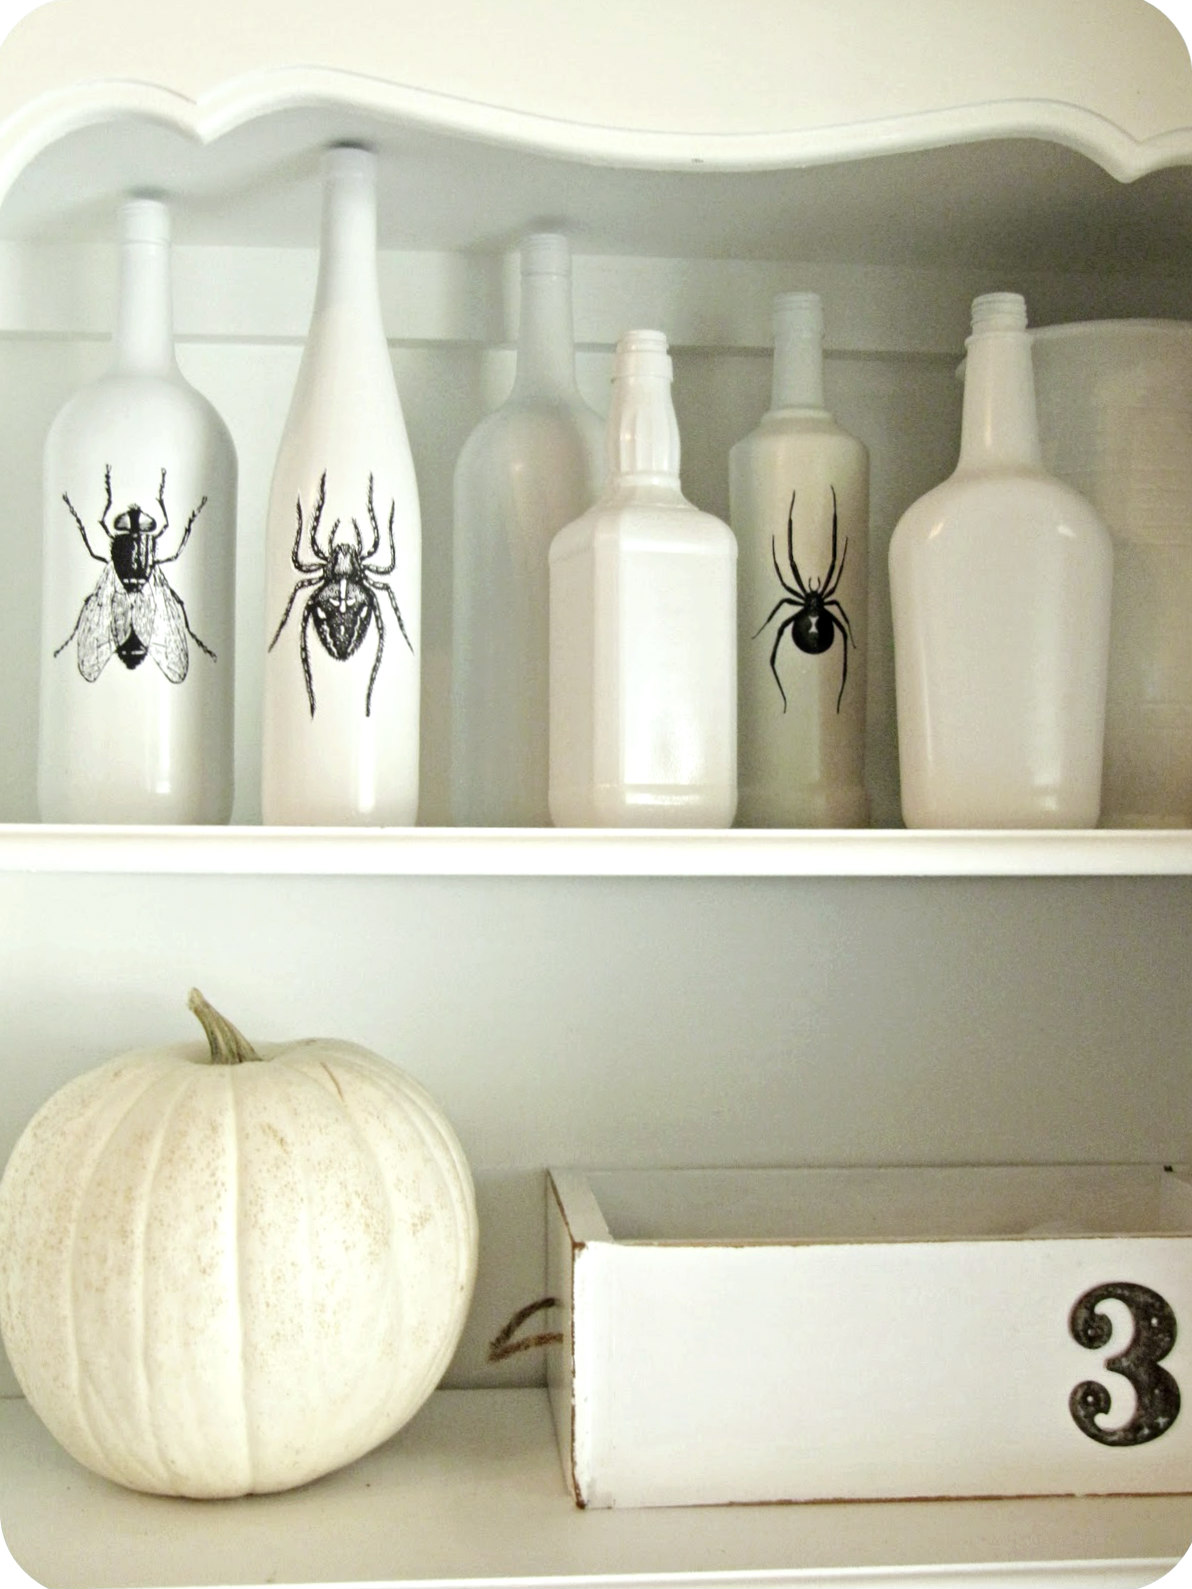 My Best Halloween Decorating and Craft Ideas from over the Years.